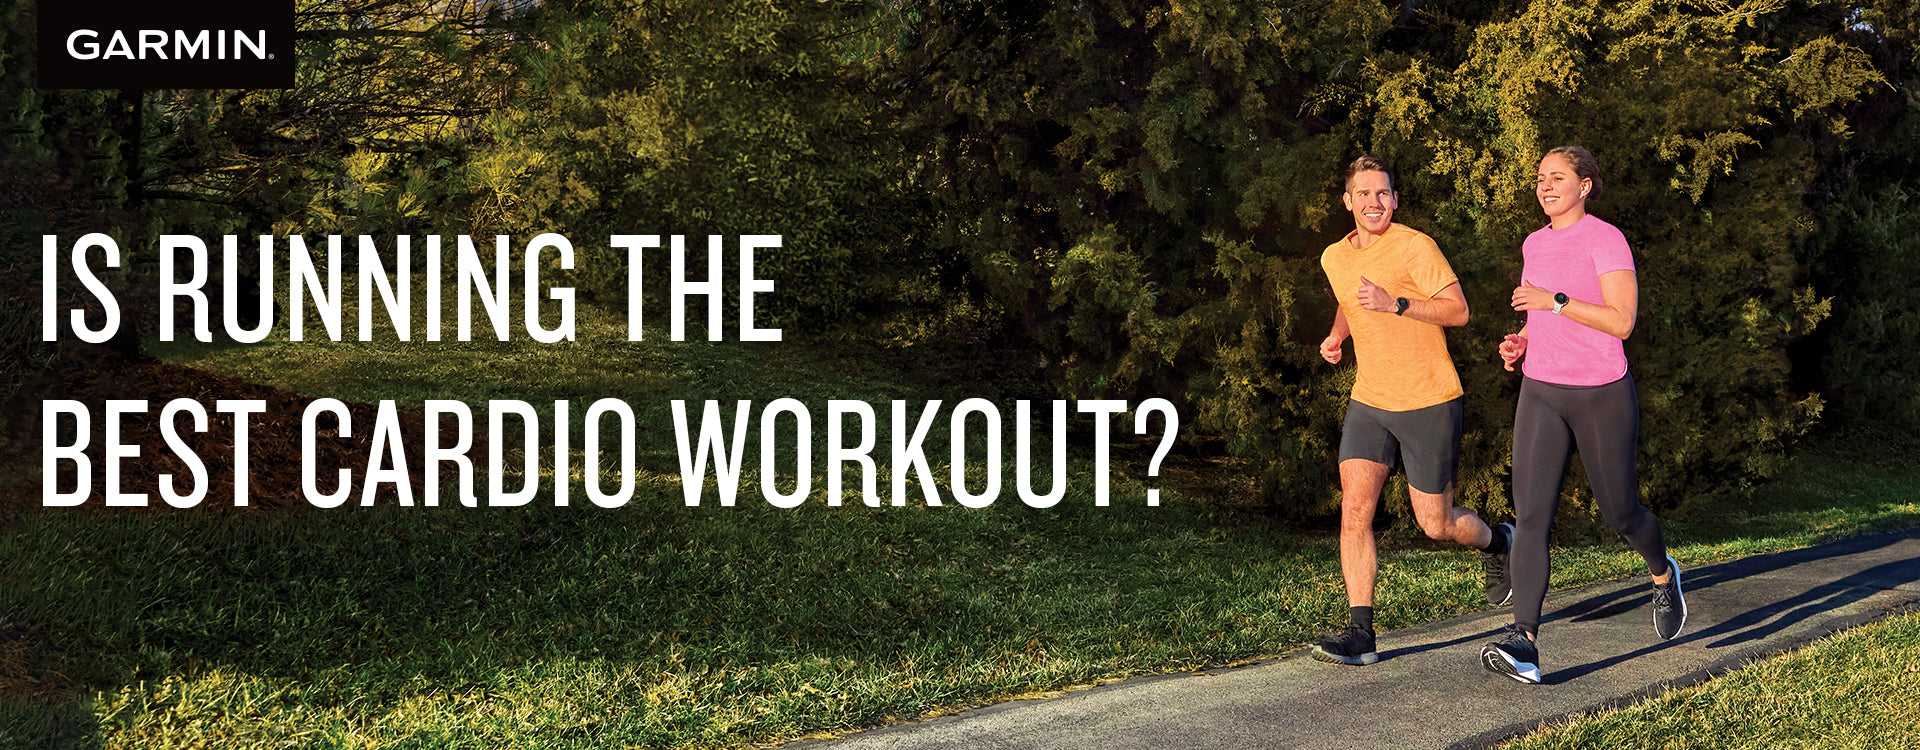 Is Running the Best Cardio Workout?